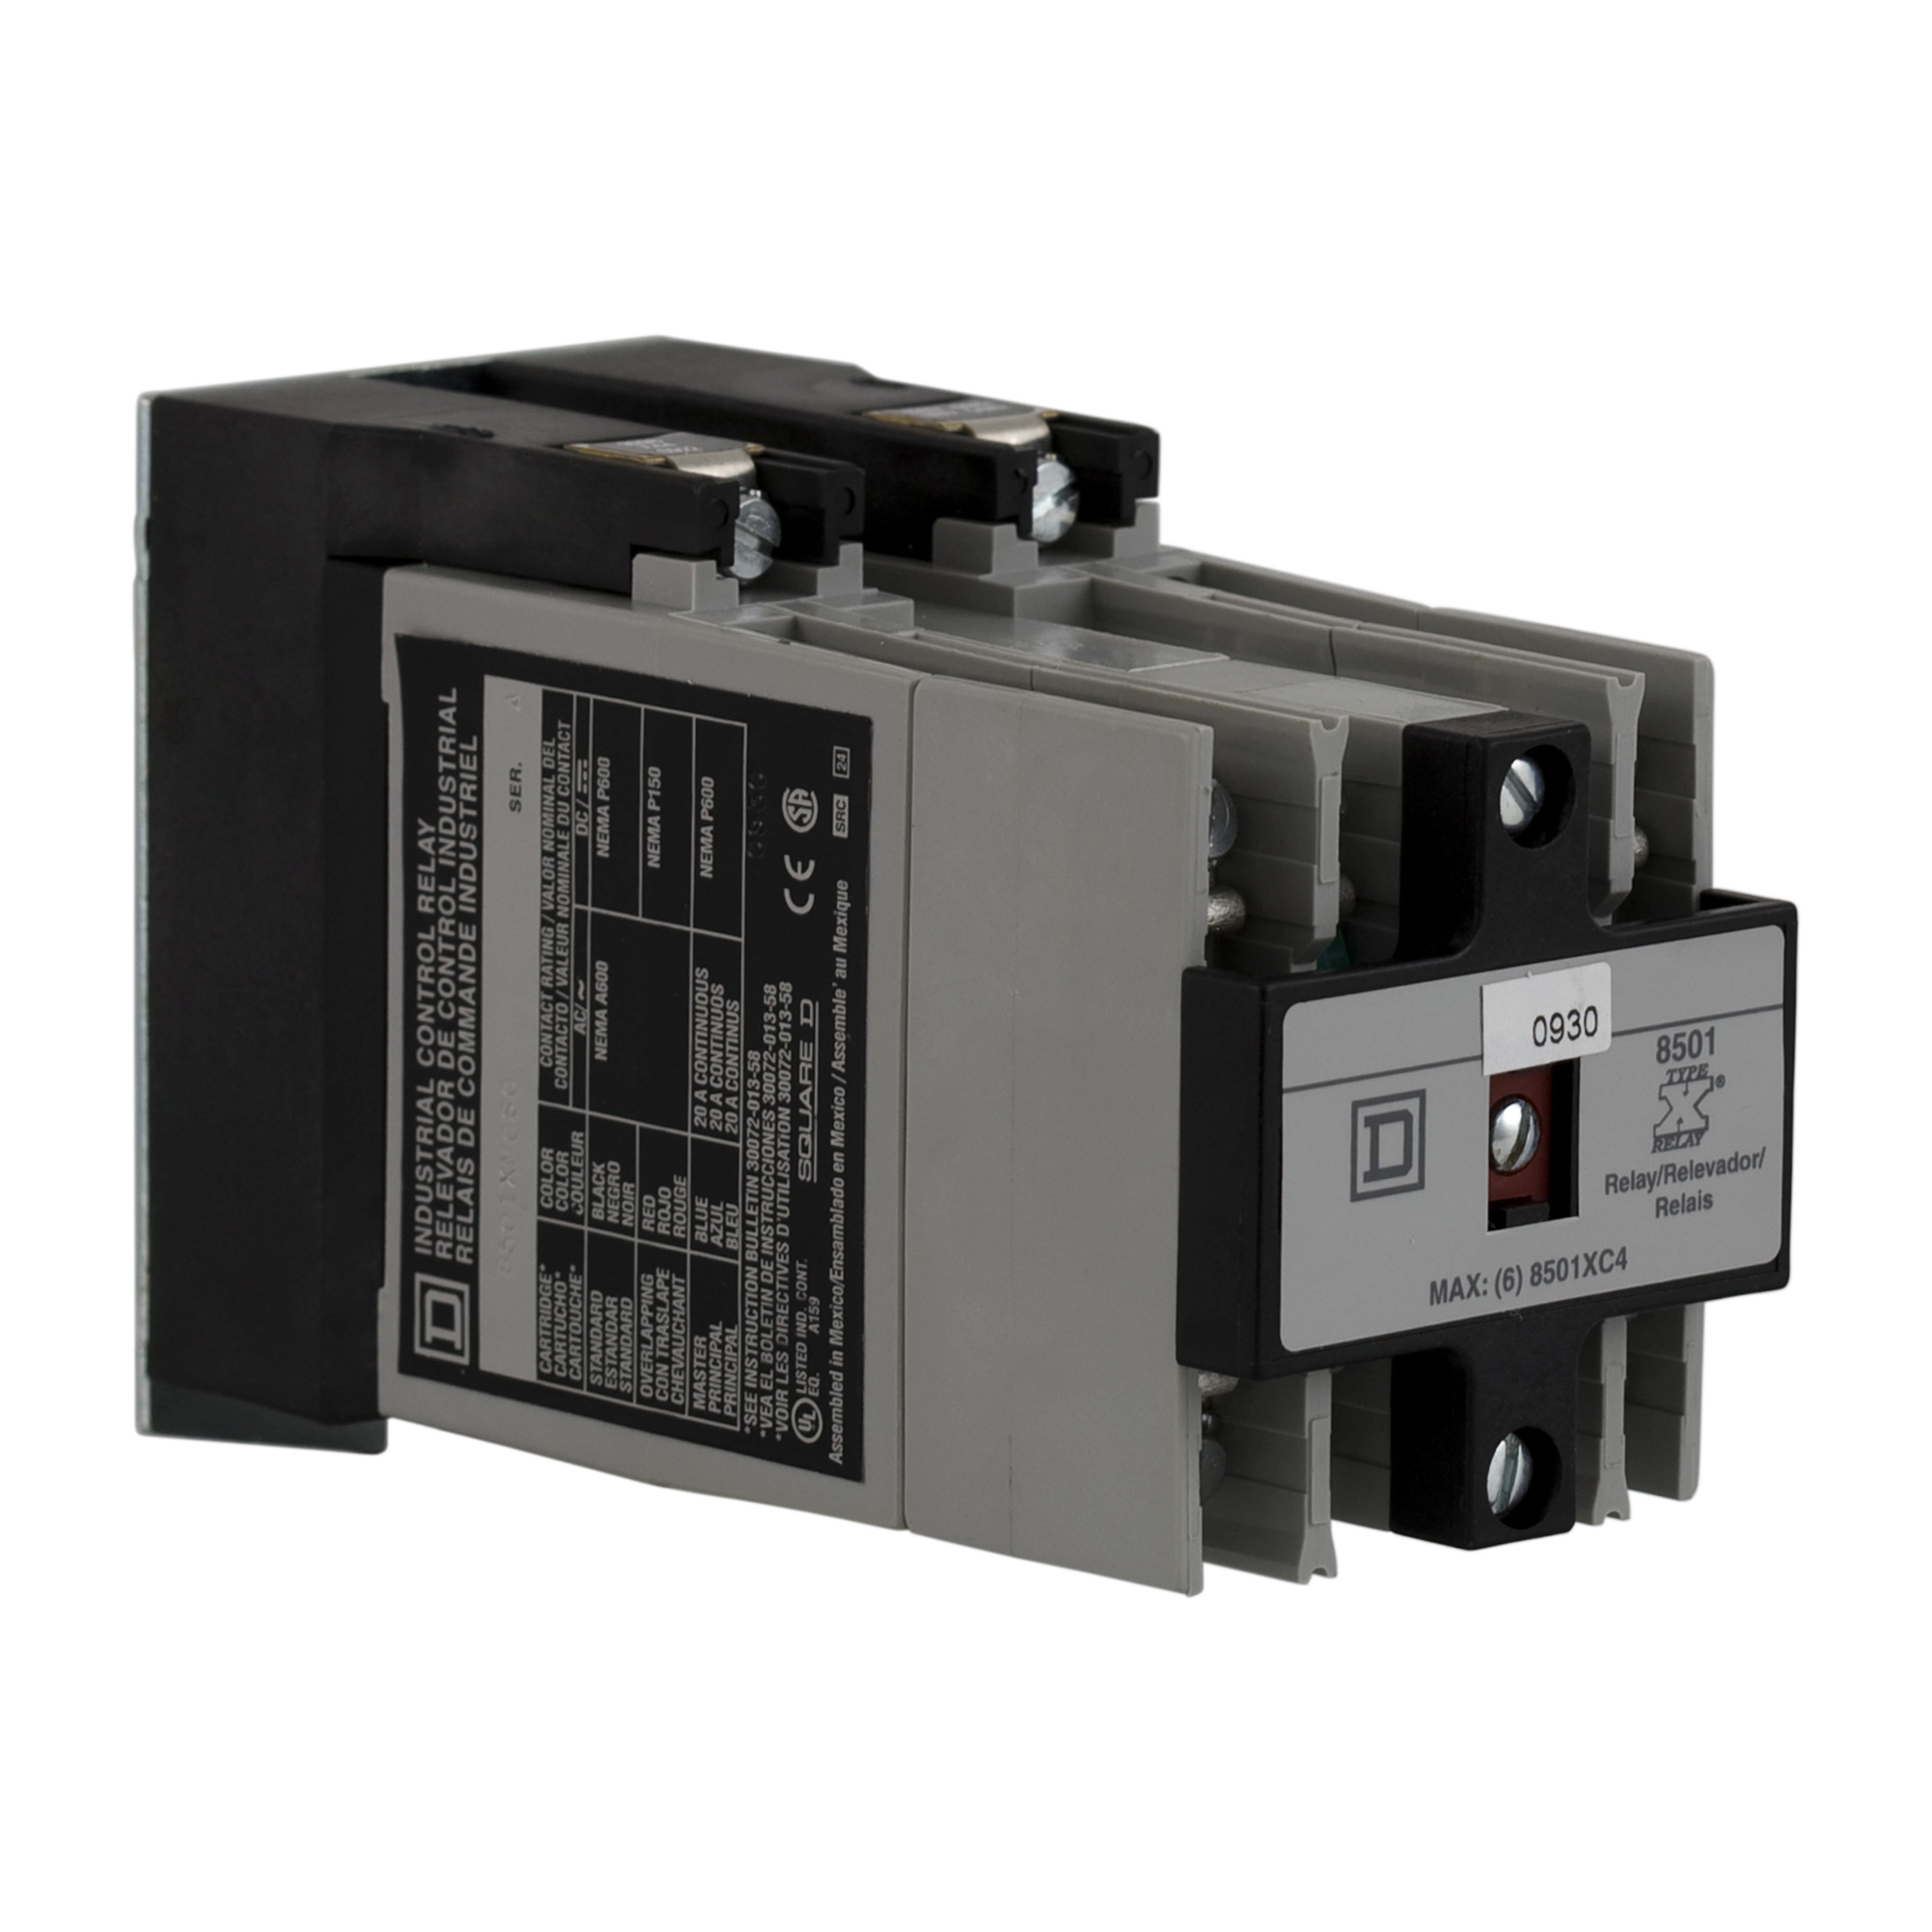 NEMA Control Relay, Type X, mounting track, for 8 8501 X relays